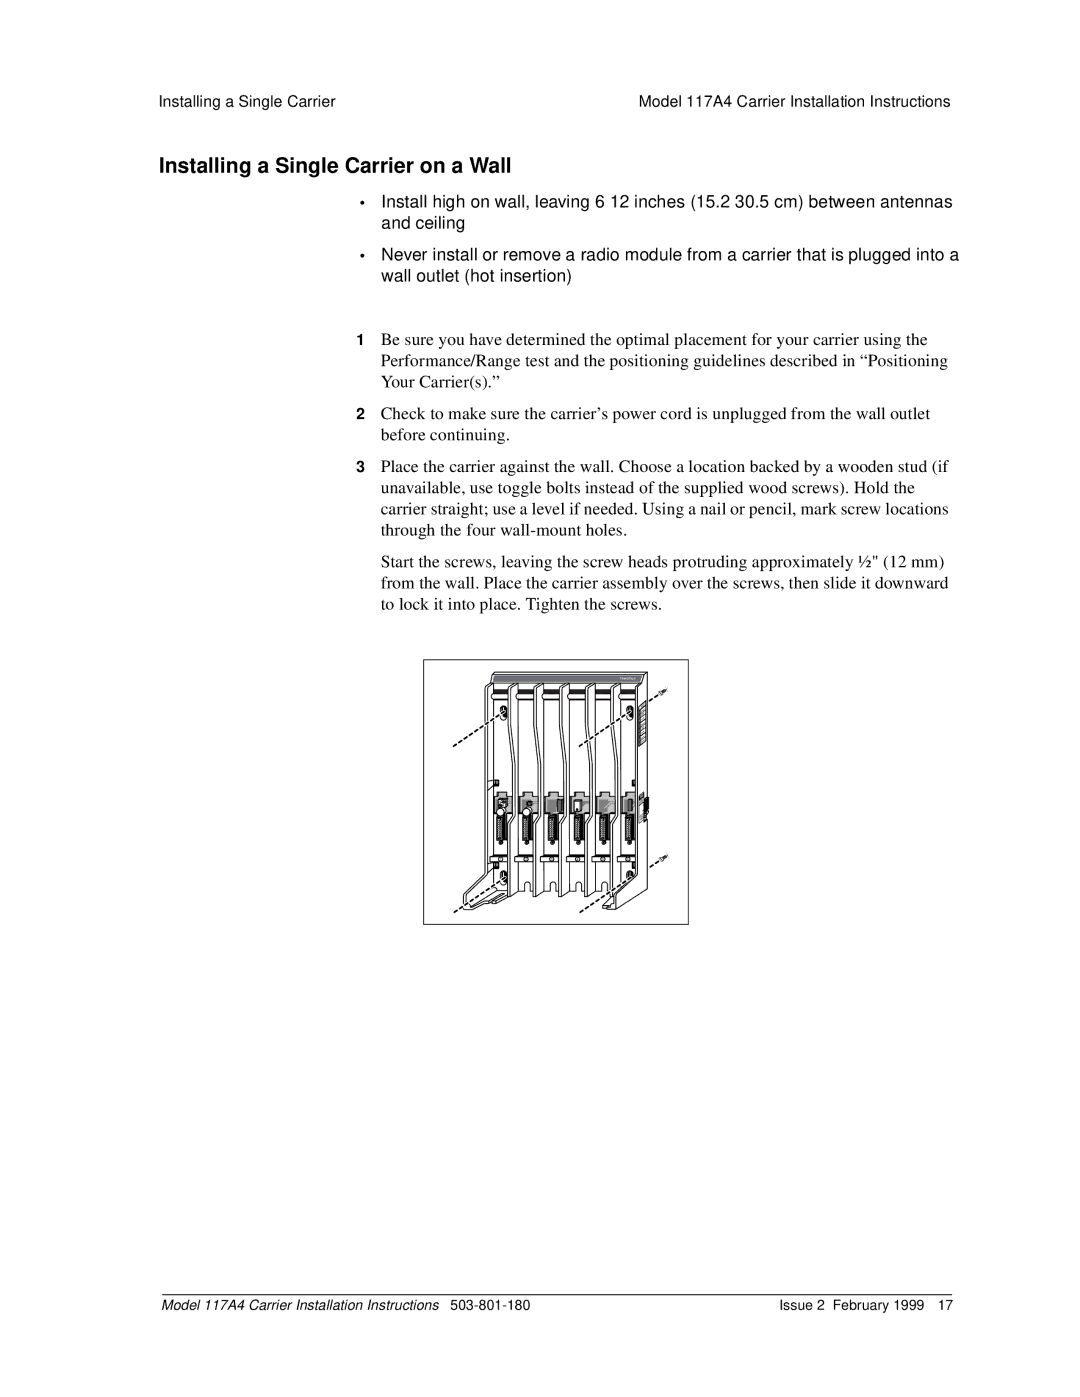 Lucent Technologies 117A4 installation instructions Installing a Single Carrier on a Wall 